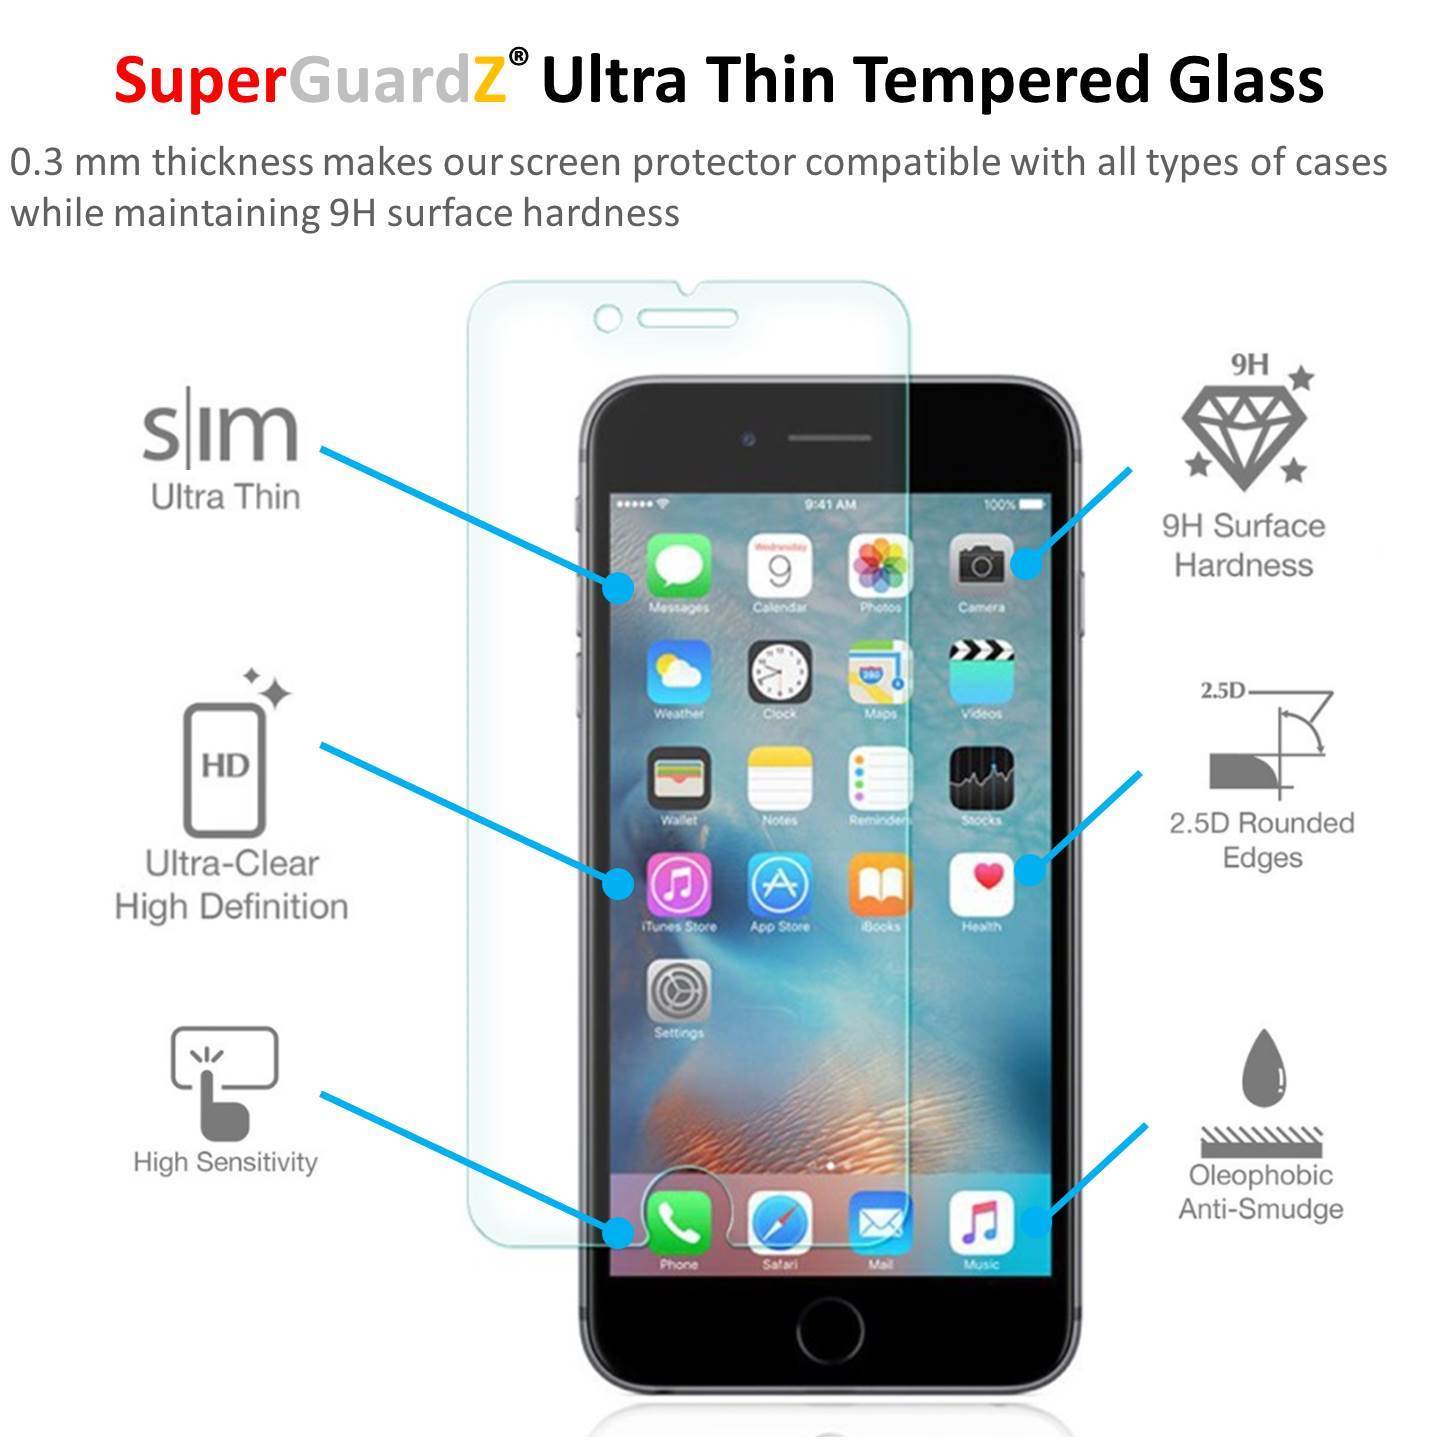 [3-Pack] For iPhone 7S Plus 5.5" / iPhone 7 Plus 5.5" - SuperGuardZ Tempered Glass Screen Protector, 9H, Anti-Scratch, Anti-Bubble, Anti-Fingerprint - image 3 of 4